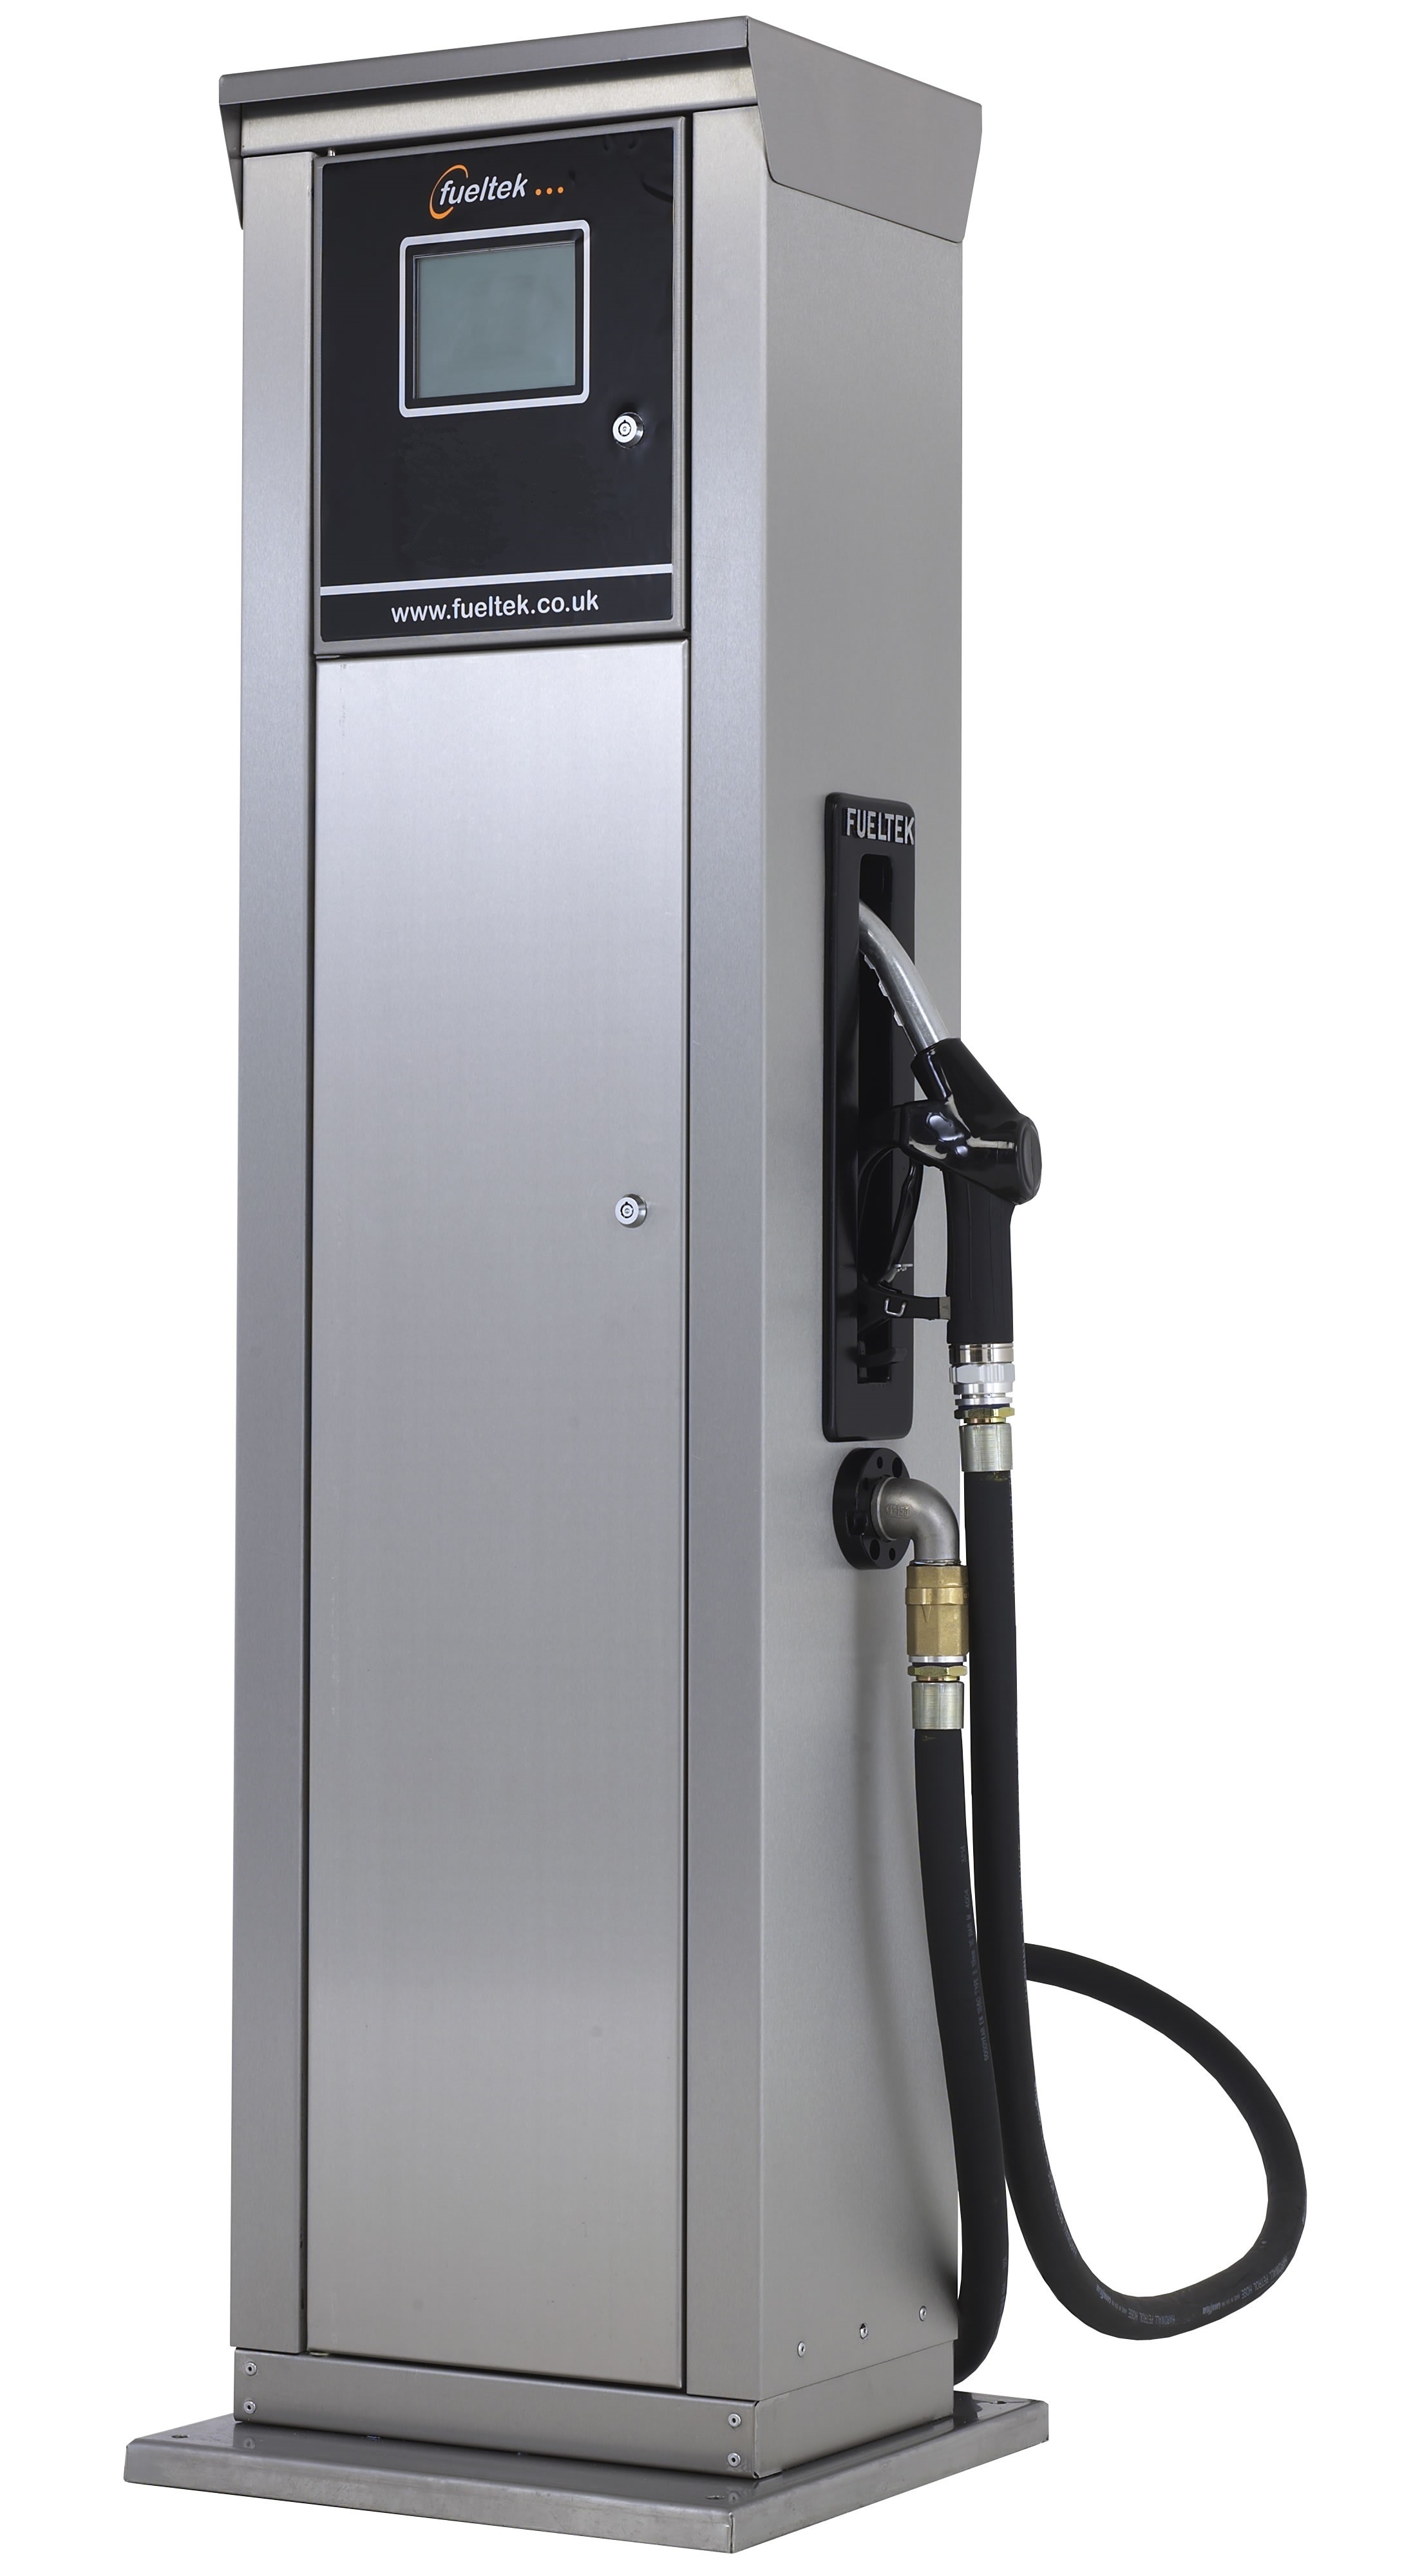 UK Manufactuers of Commercial Fuel Dispensers